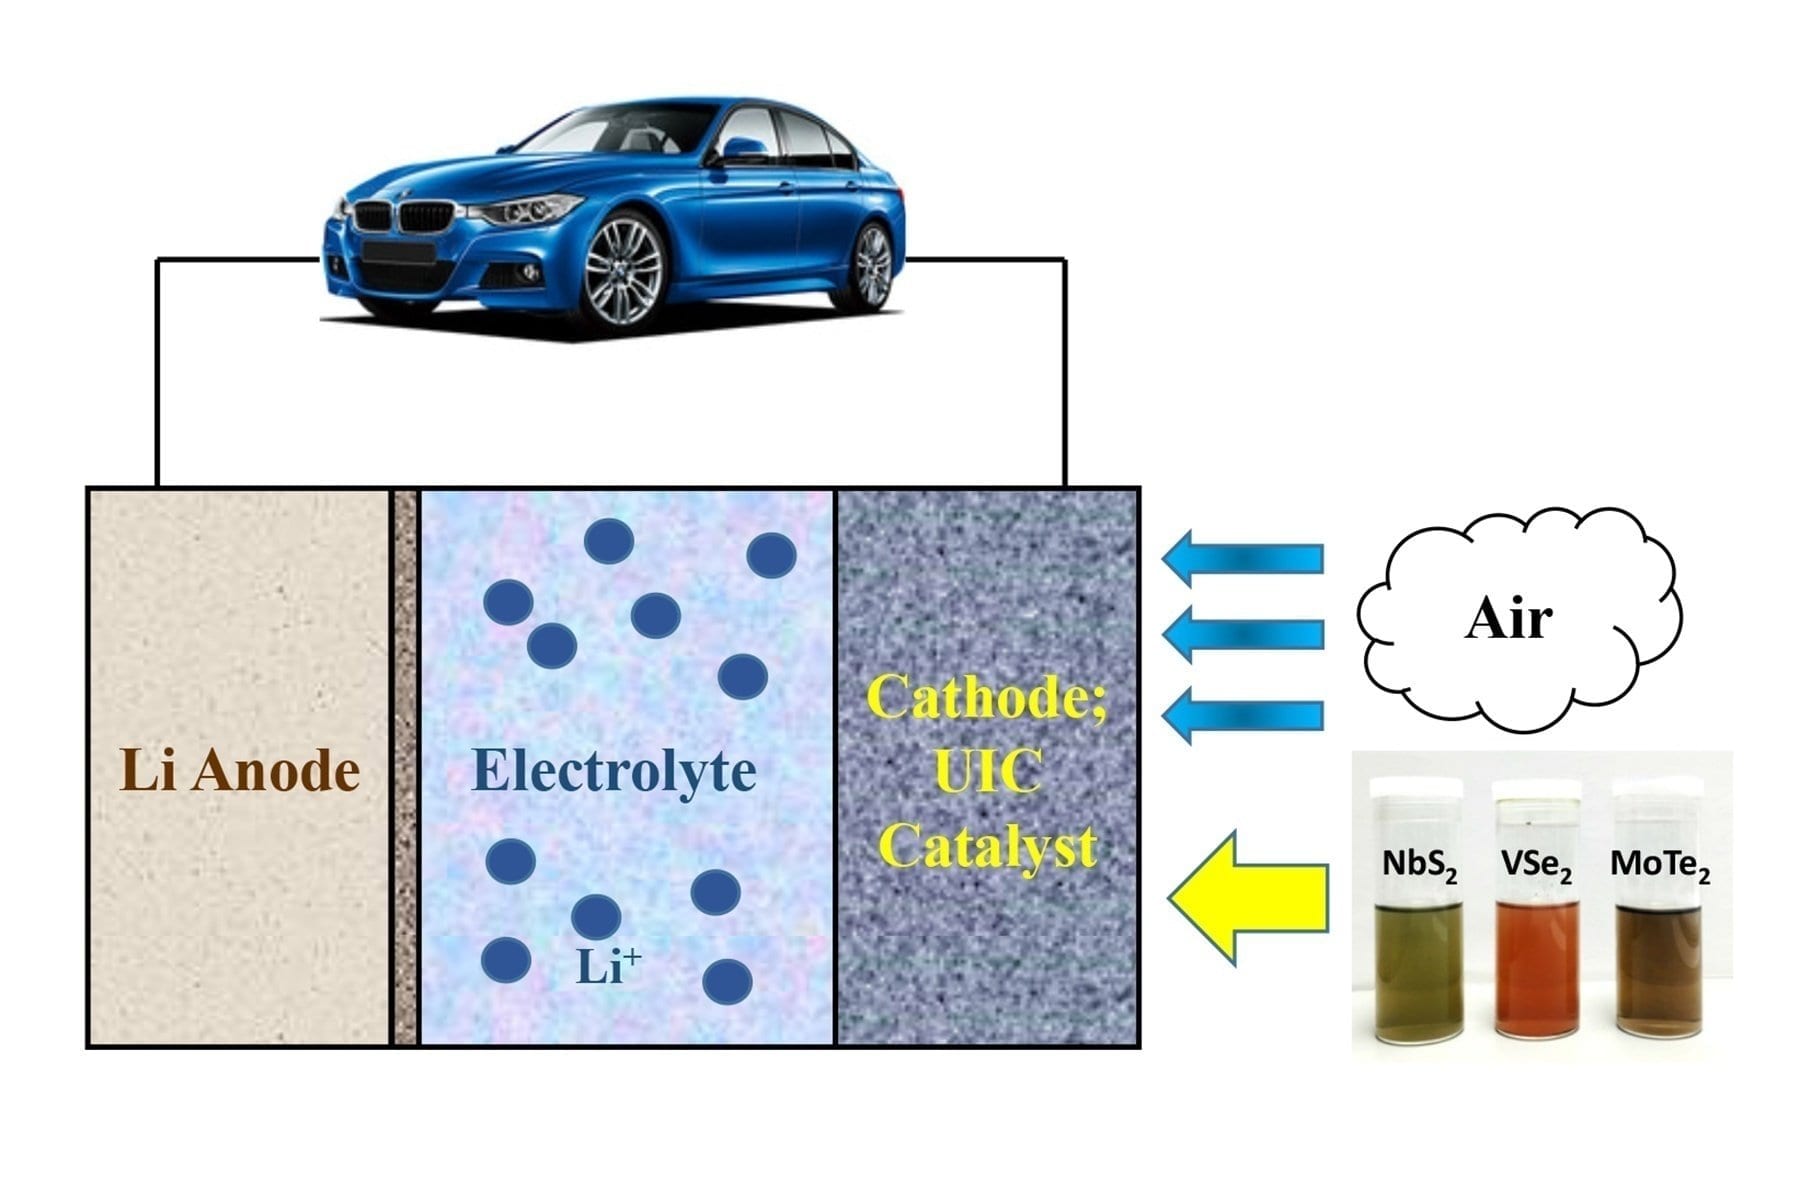 Enabling electric vehicles to get 500 miles on a single charge